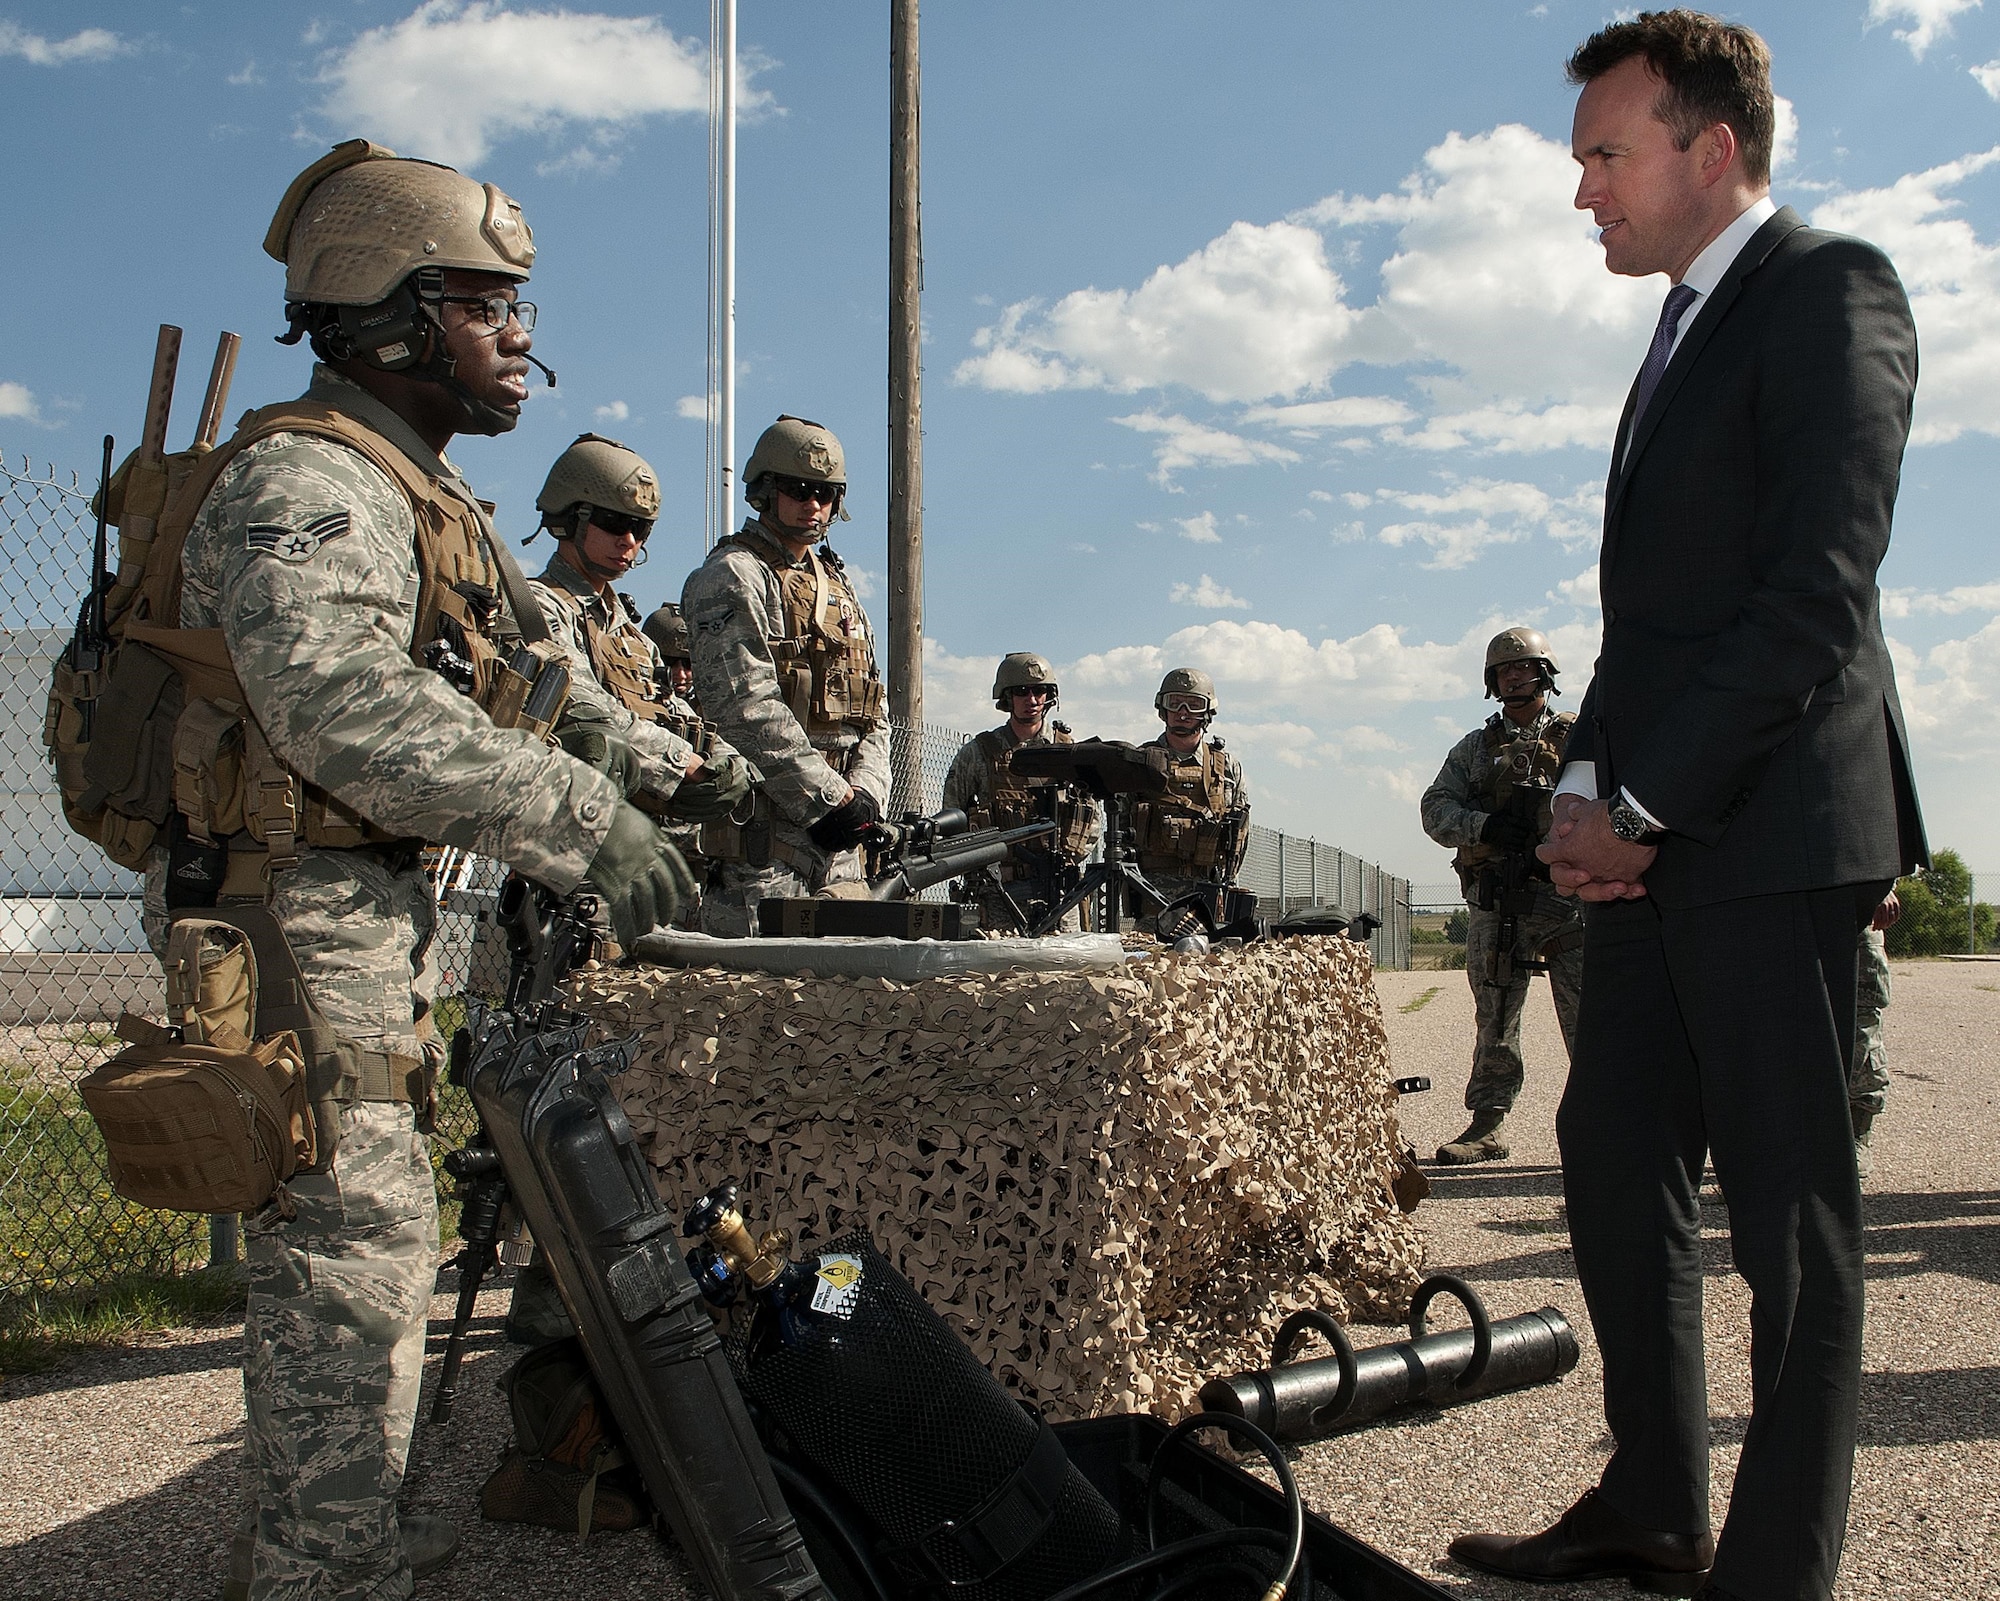 Acting Secretary of the Air Force Eric Fanning (right), listens to a brief by Senior Airman Anthony Black during a visit Aug. 15, 2013, to F.E. Warren Air Force Base, Wyo. Black talked to Fanning about explosive and mechanical means of forcing entry into spaces while other members of his team briefed the secretary on weapons and tactics. The TRF’s mission is to protect or if need be, recapture the 90th Missile Wings nuclear assets. Black is a 90th Security Group Tactical Response Force breacher.